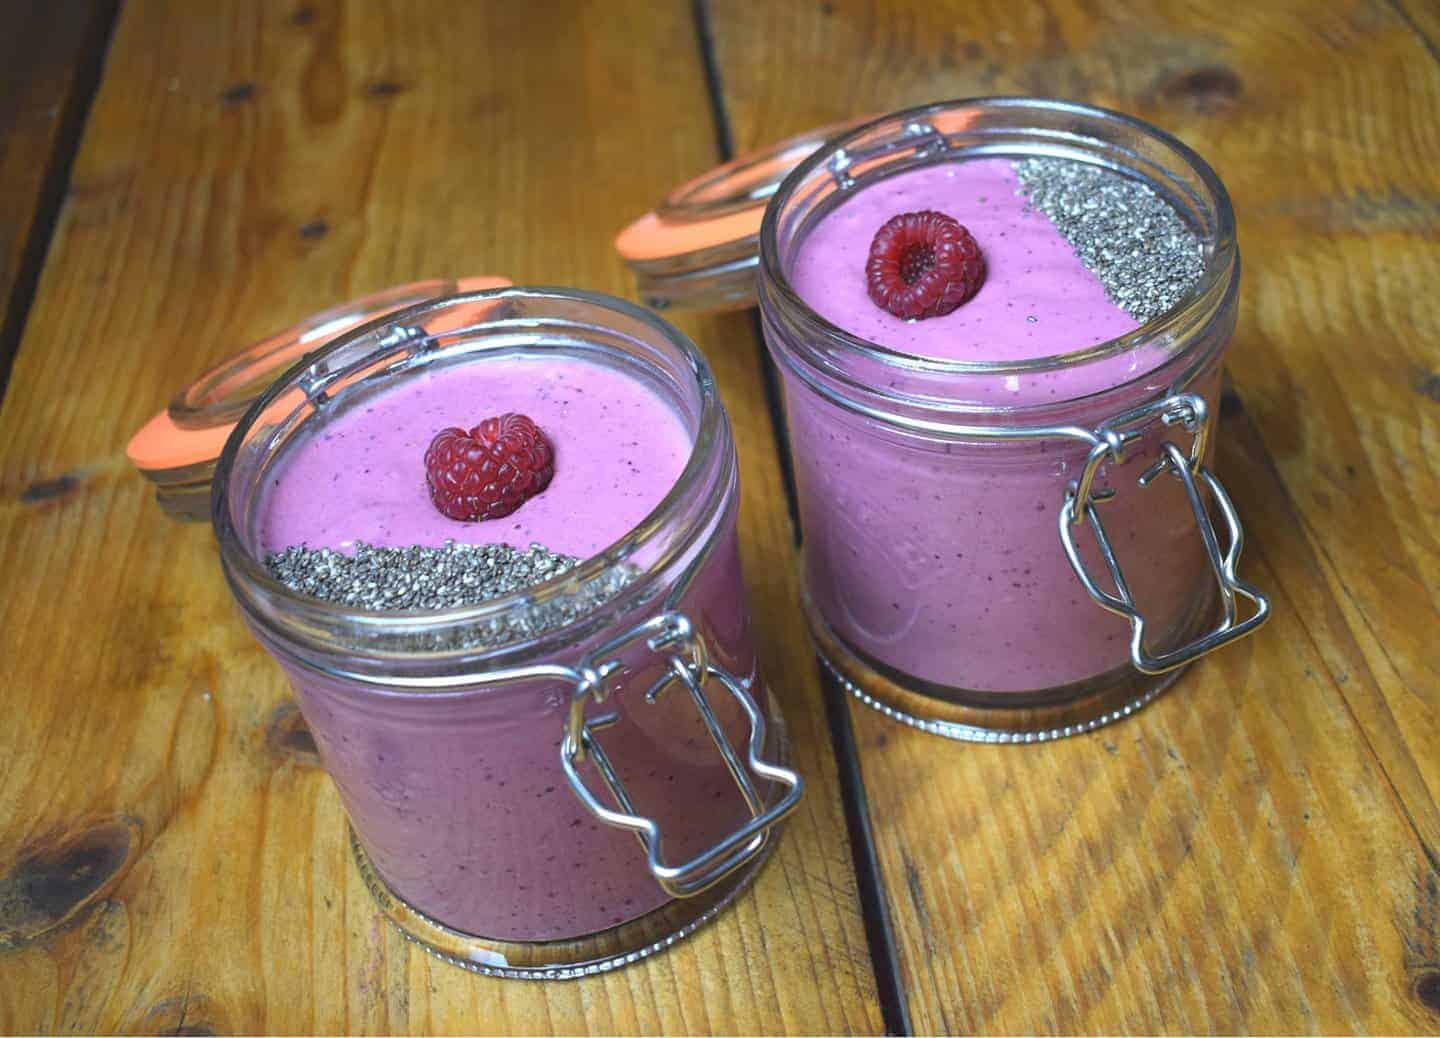 Peanut butter smoothie with berries in a clip jar topped with chia seed and a raspberry